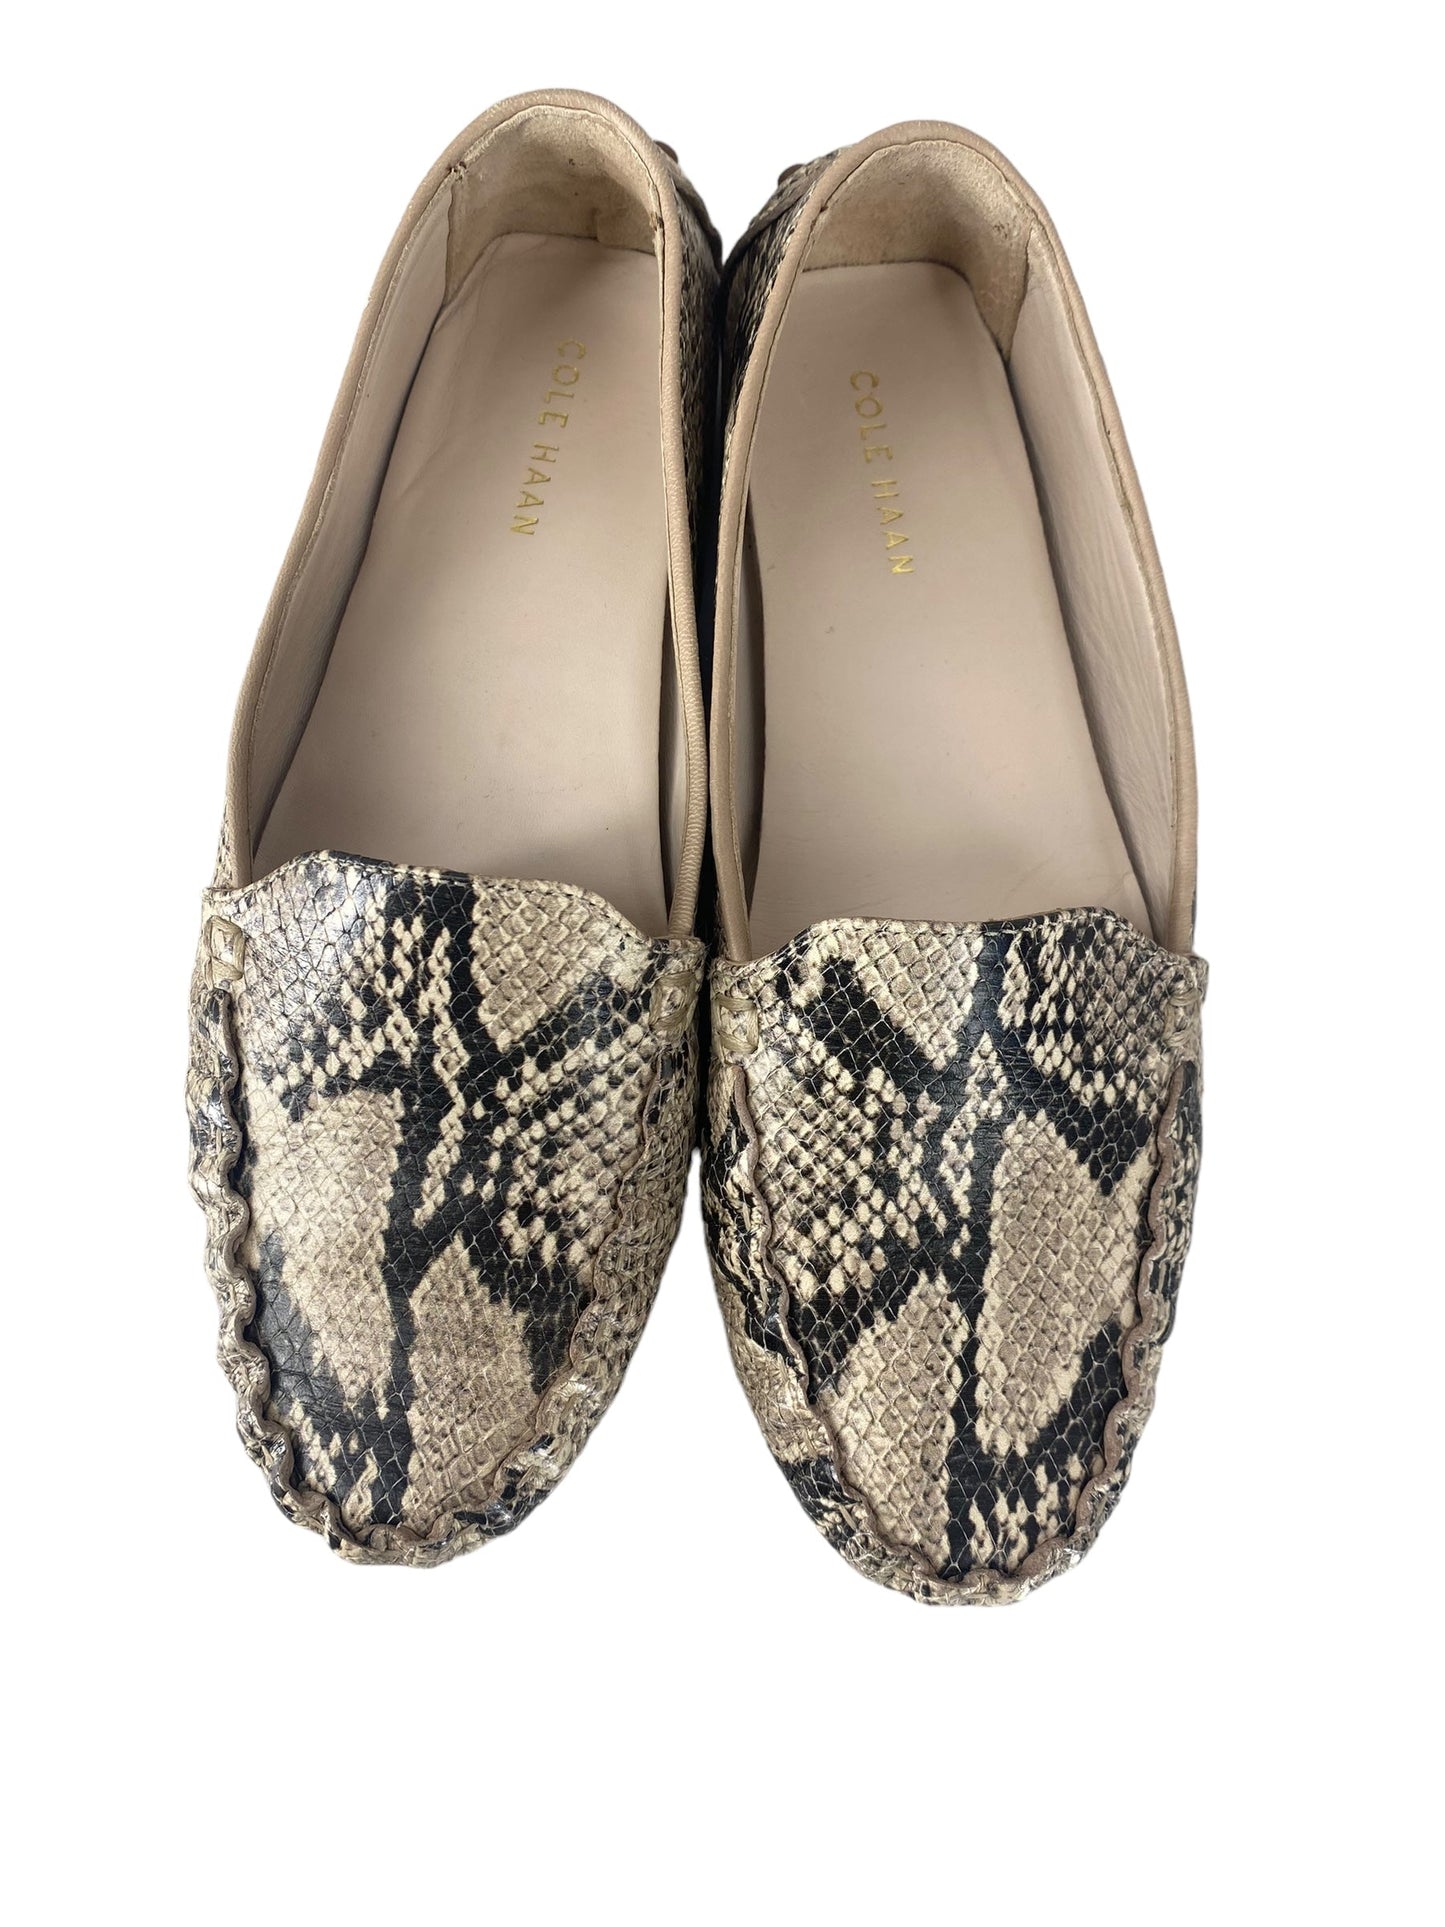 Snakeskin Print Shoes Flats Cole-haan, Size 6